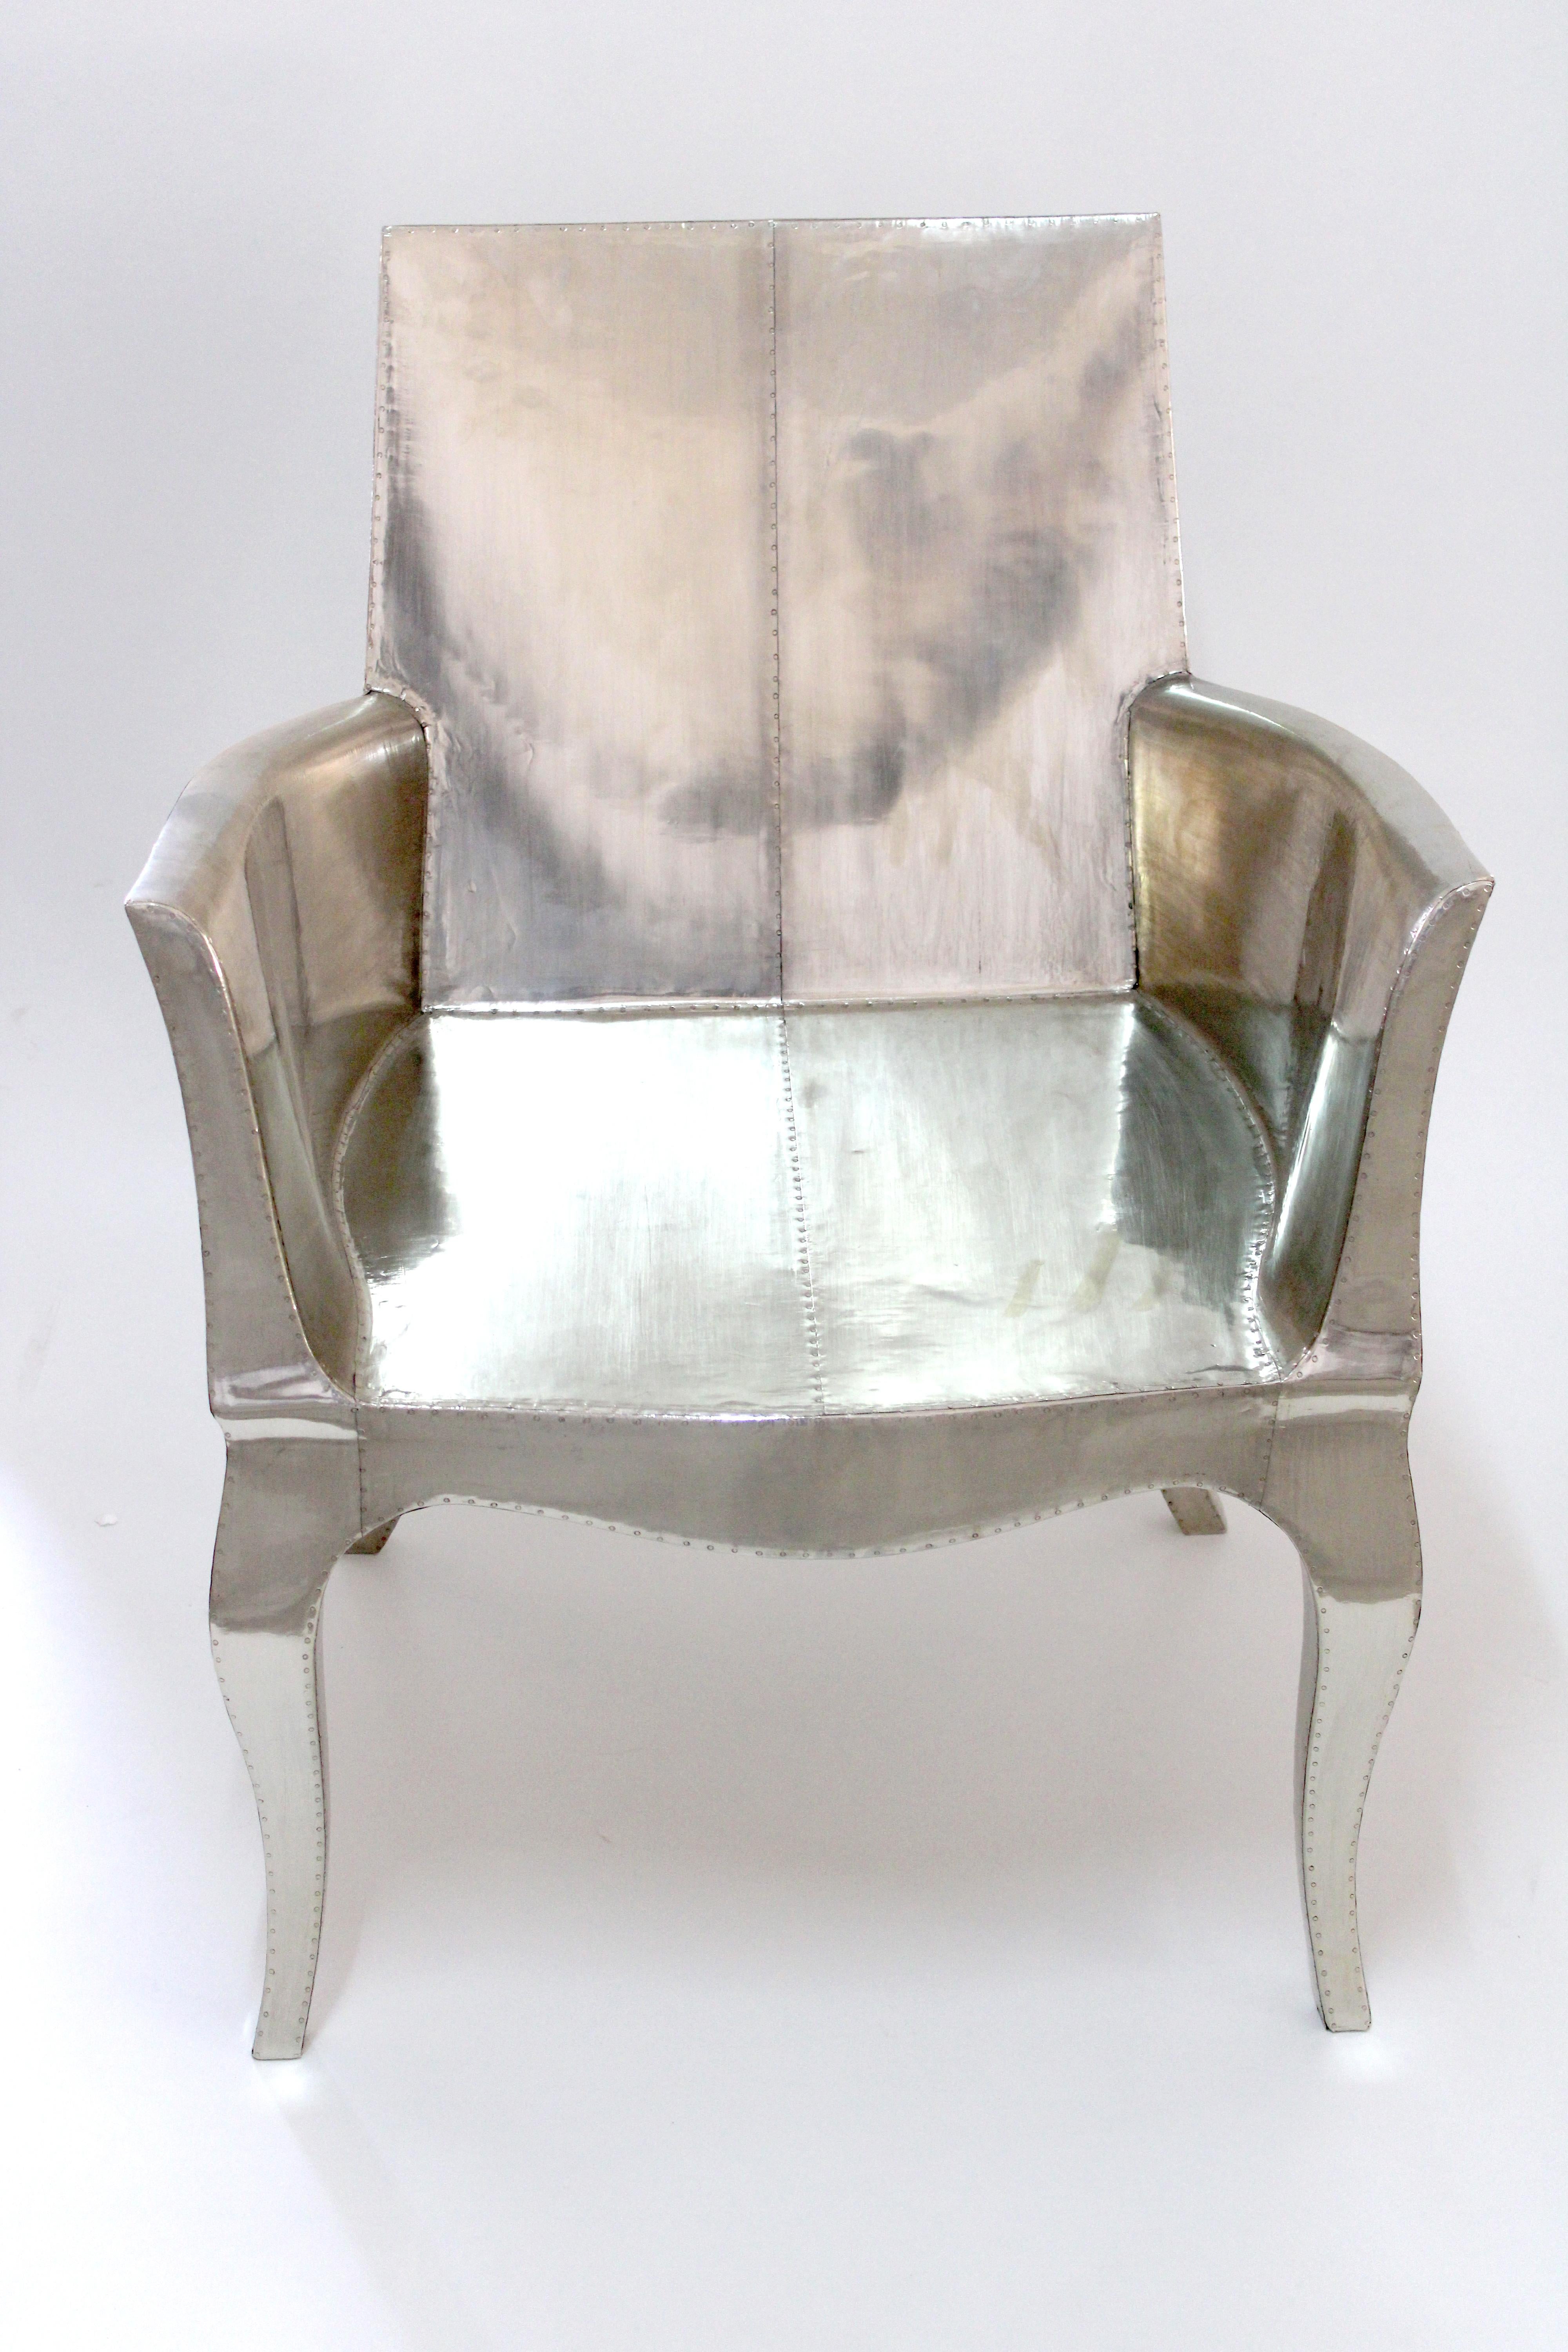 Woodwork Art Deco Dining Chairs Smooth White Bronze by Paul Mathieu for S. Odegard For Sale